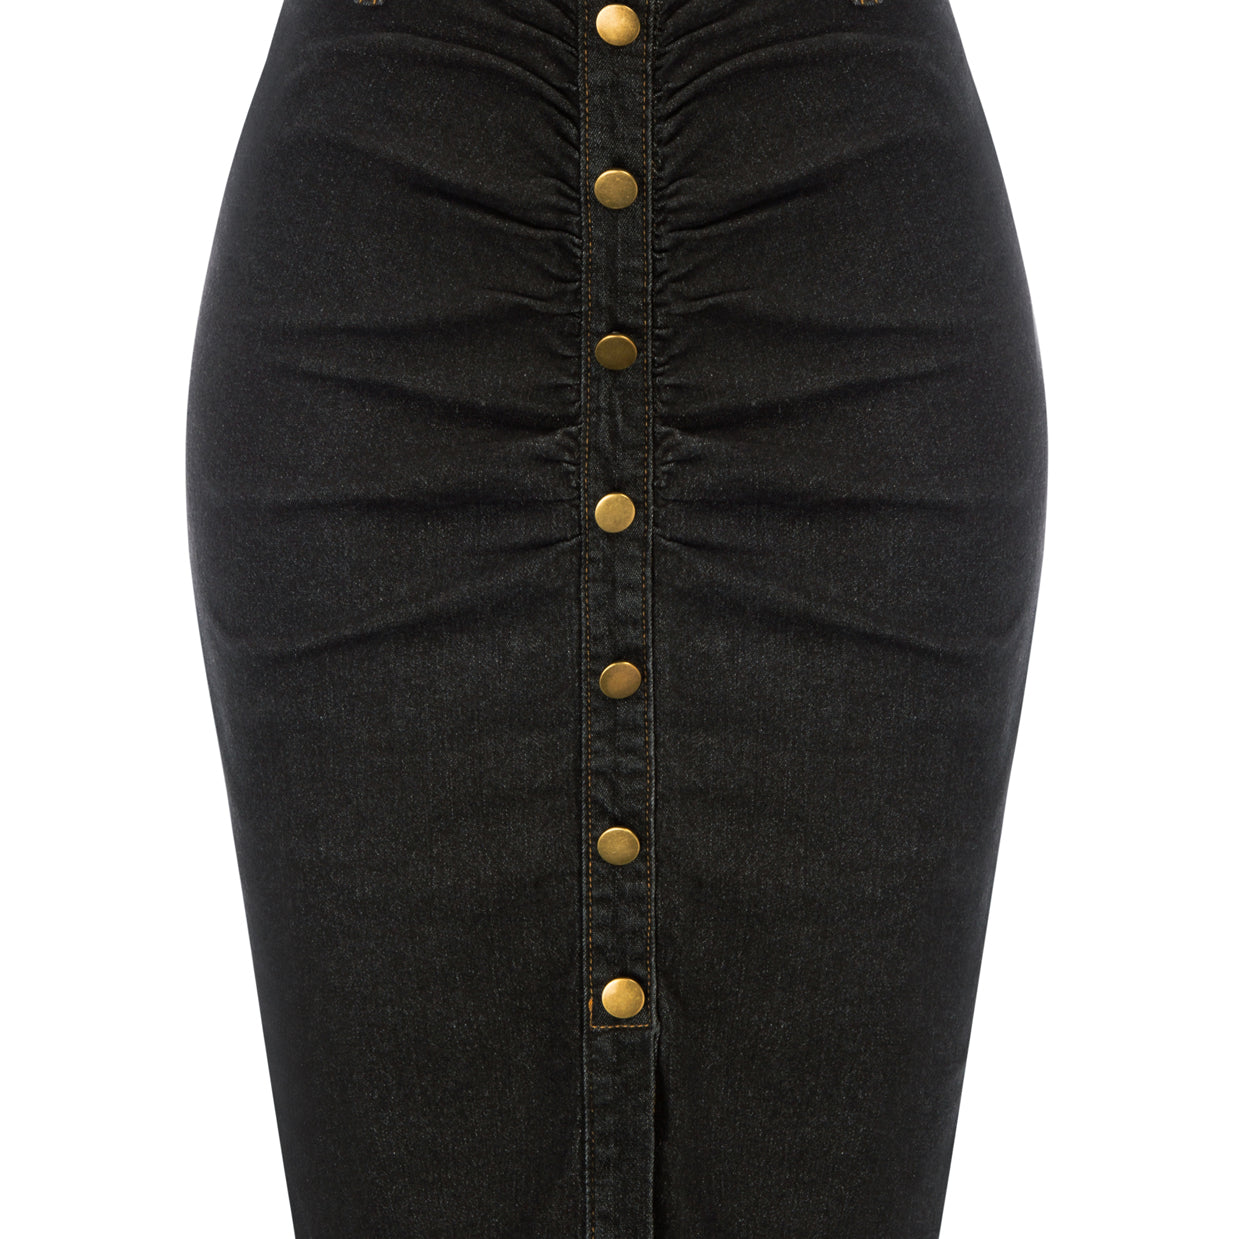 Vintage Jean Skirt with Belt High Waist Ruched Front Bodycon Skirt